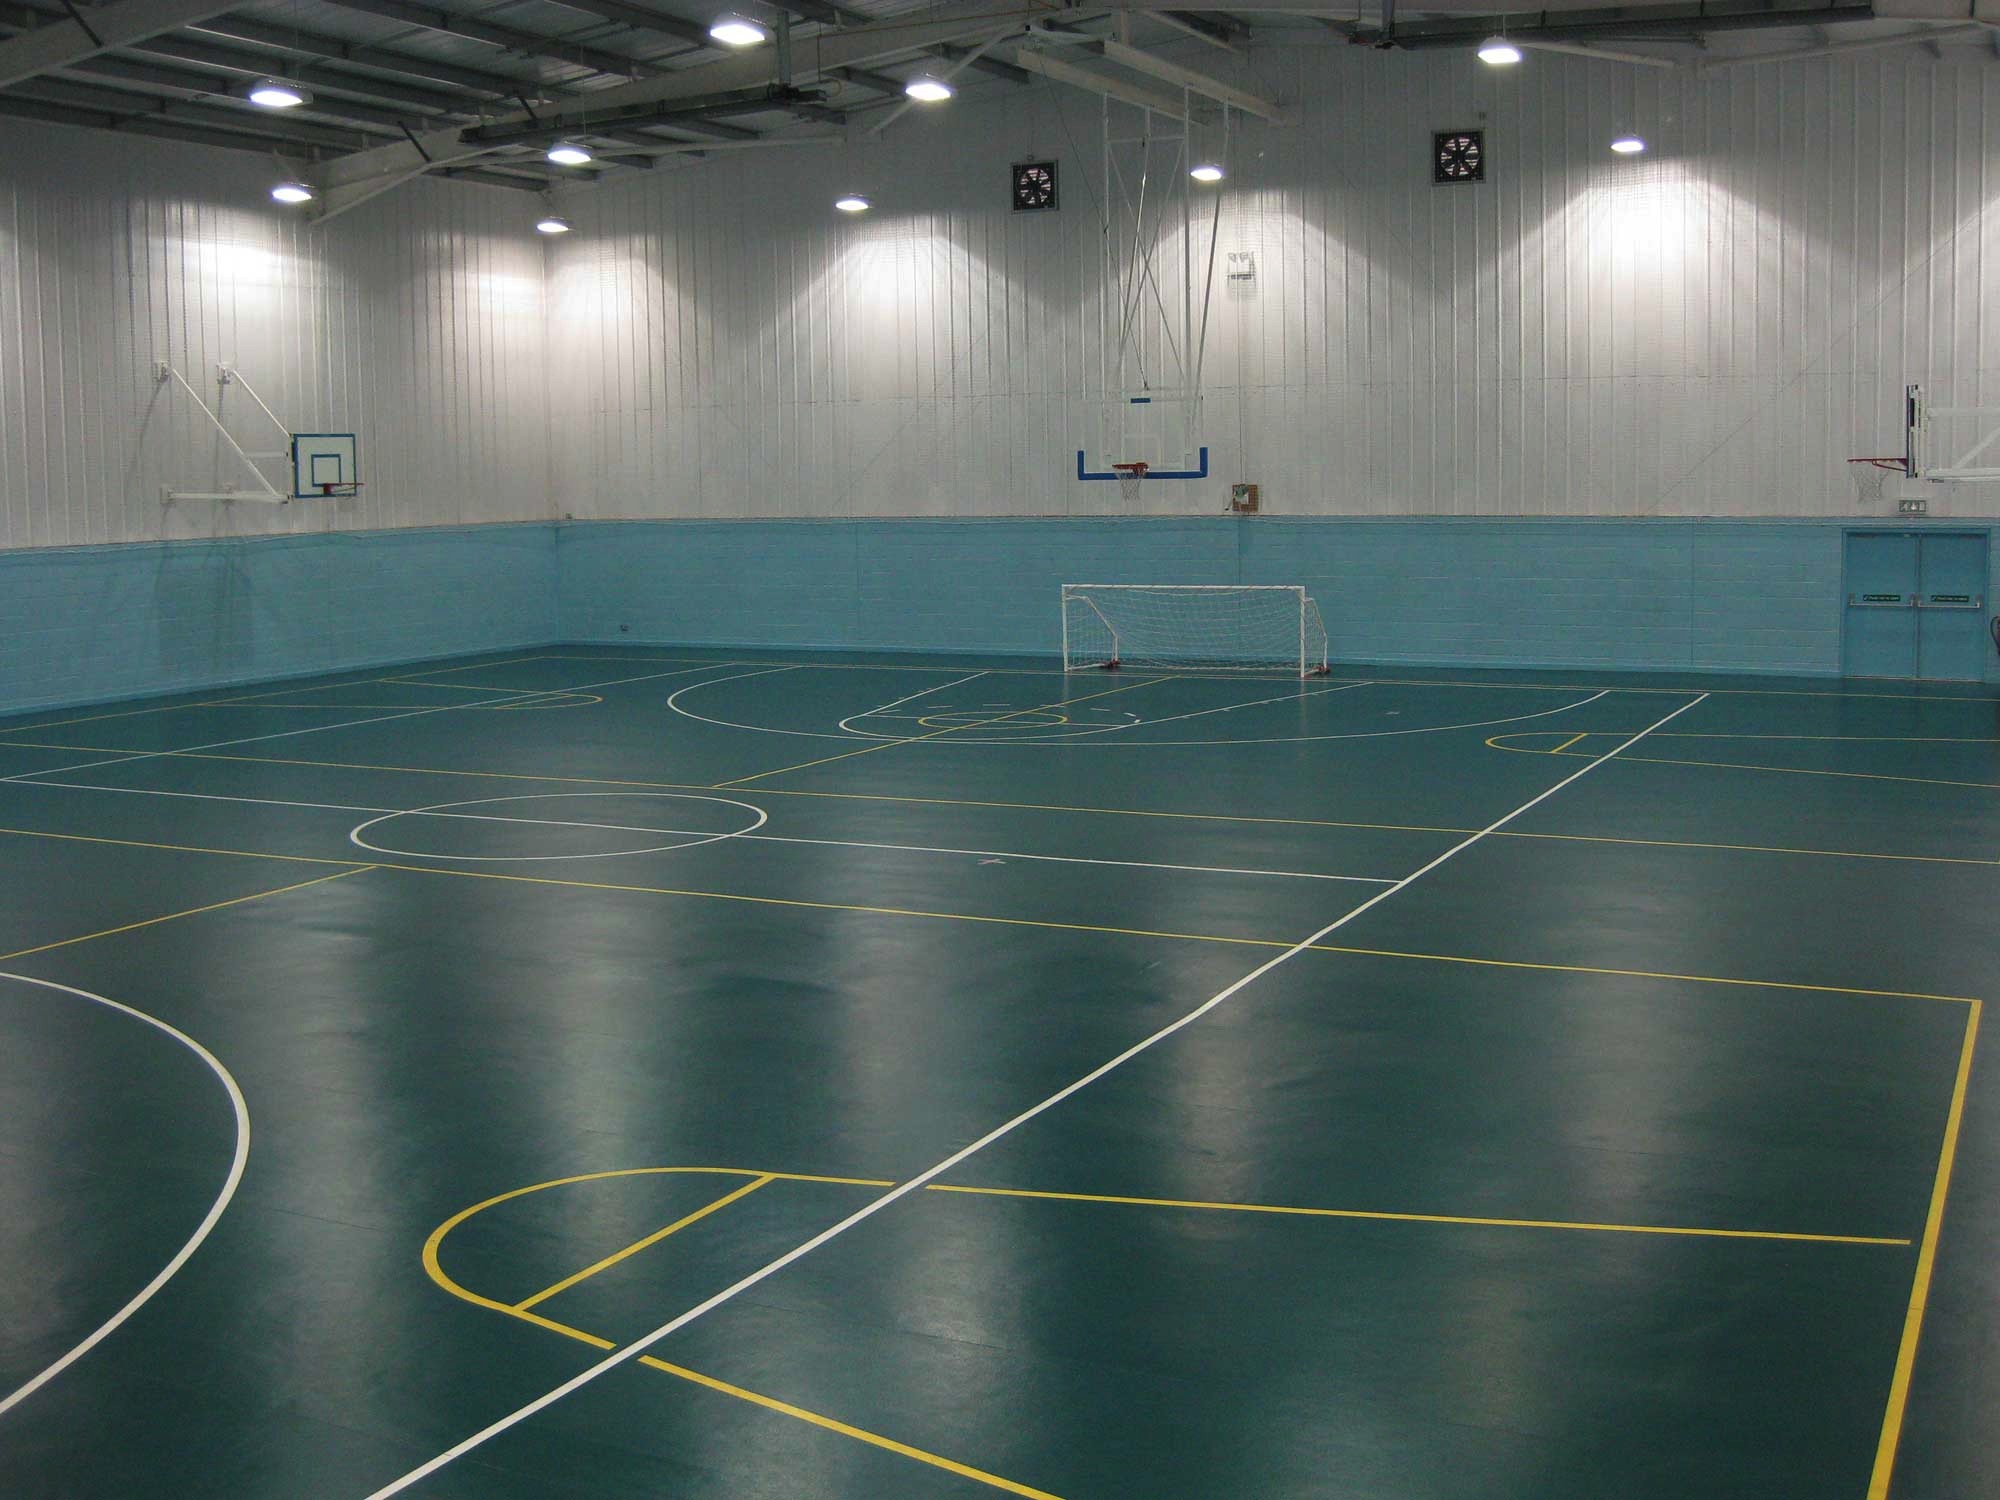    4 badminton court sized sports hall (demo picture)   